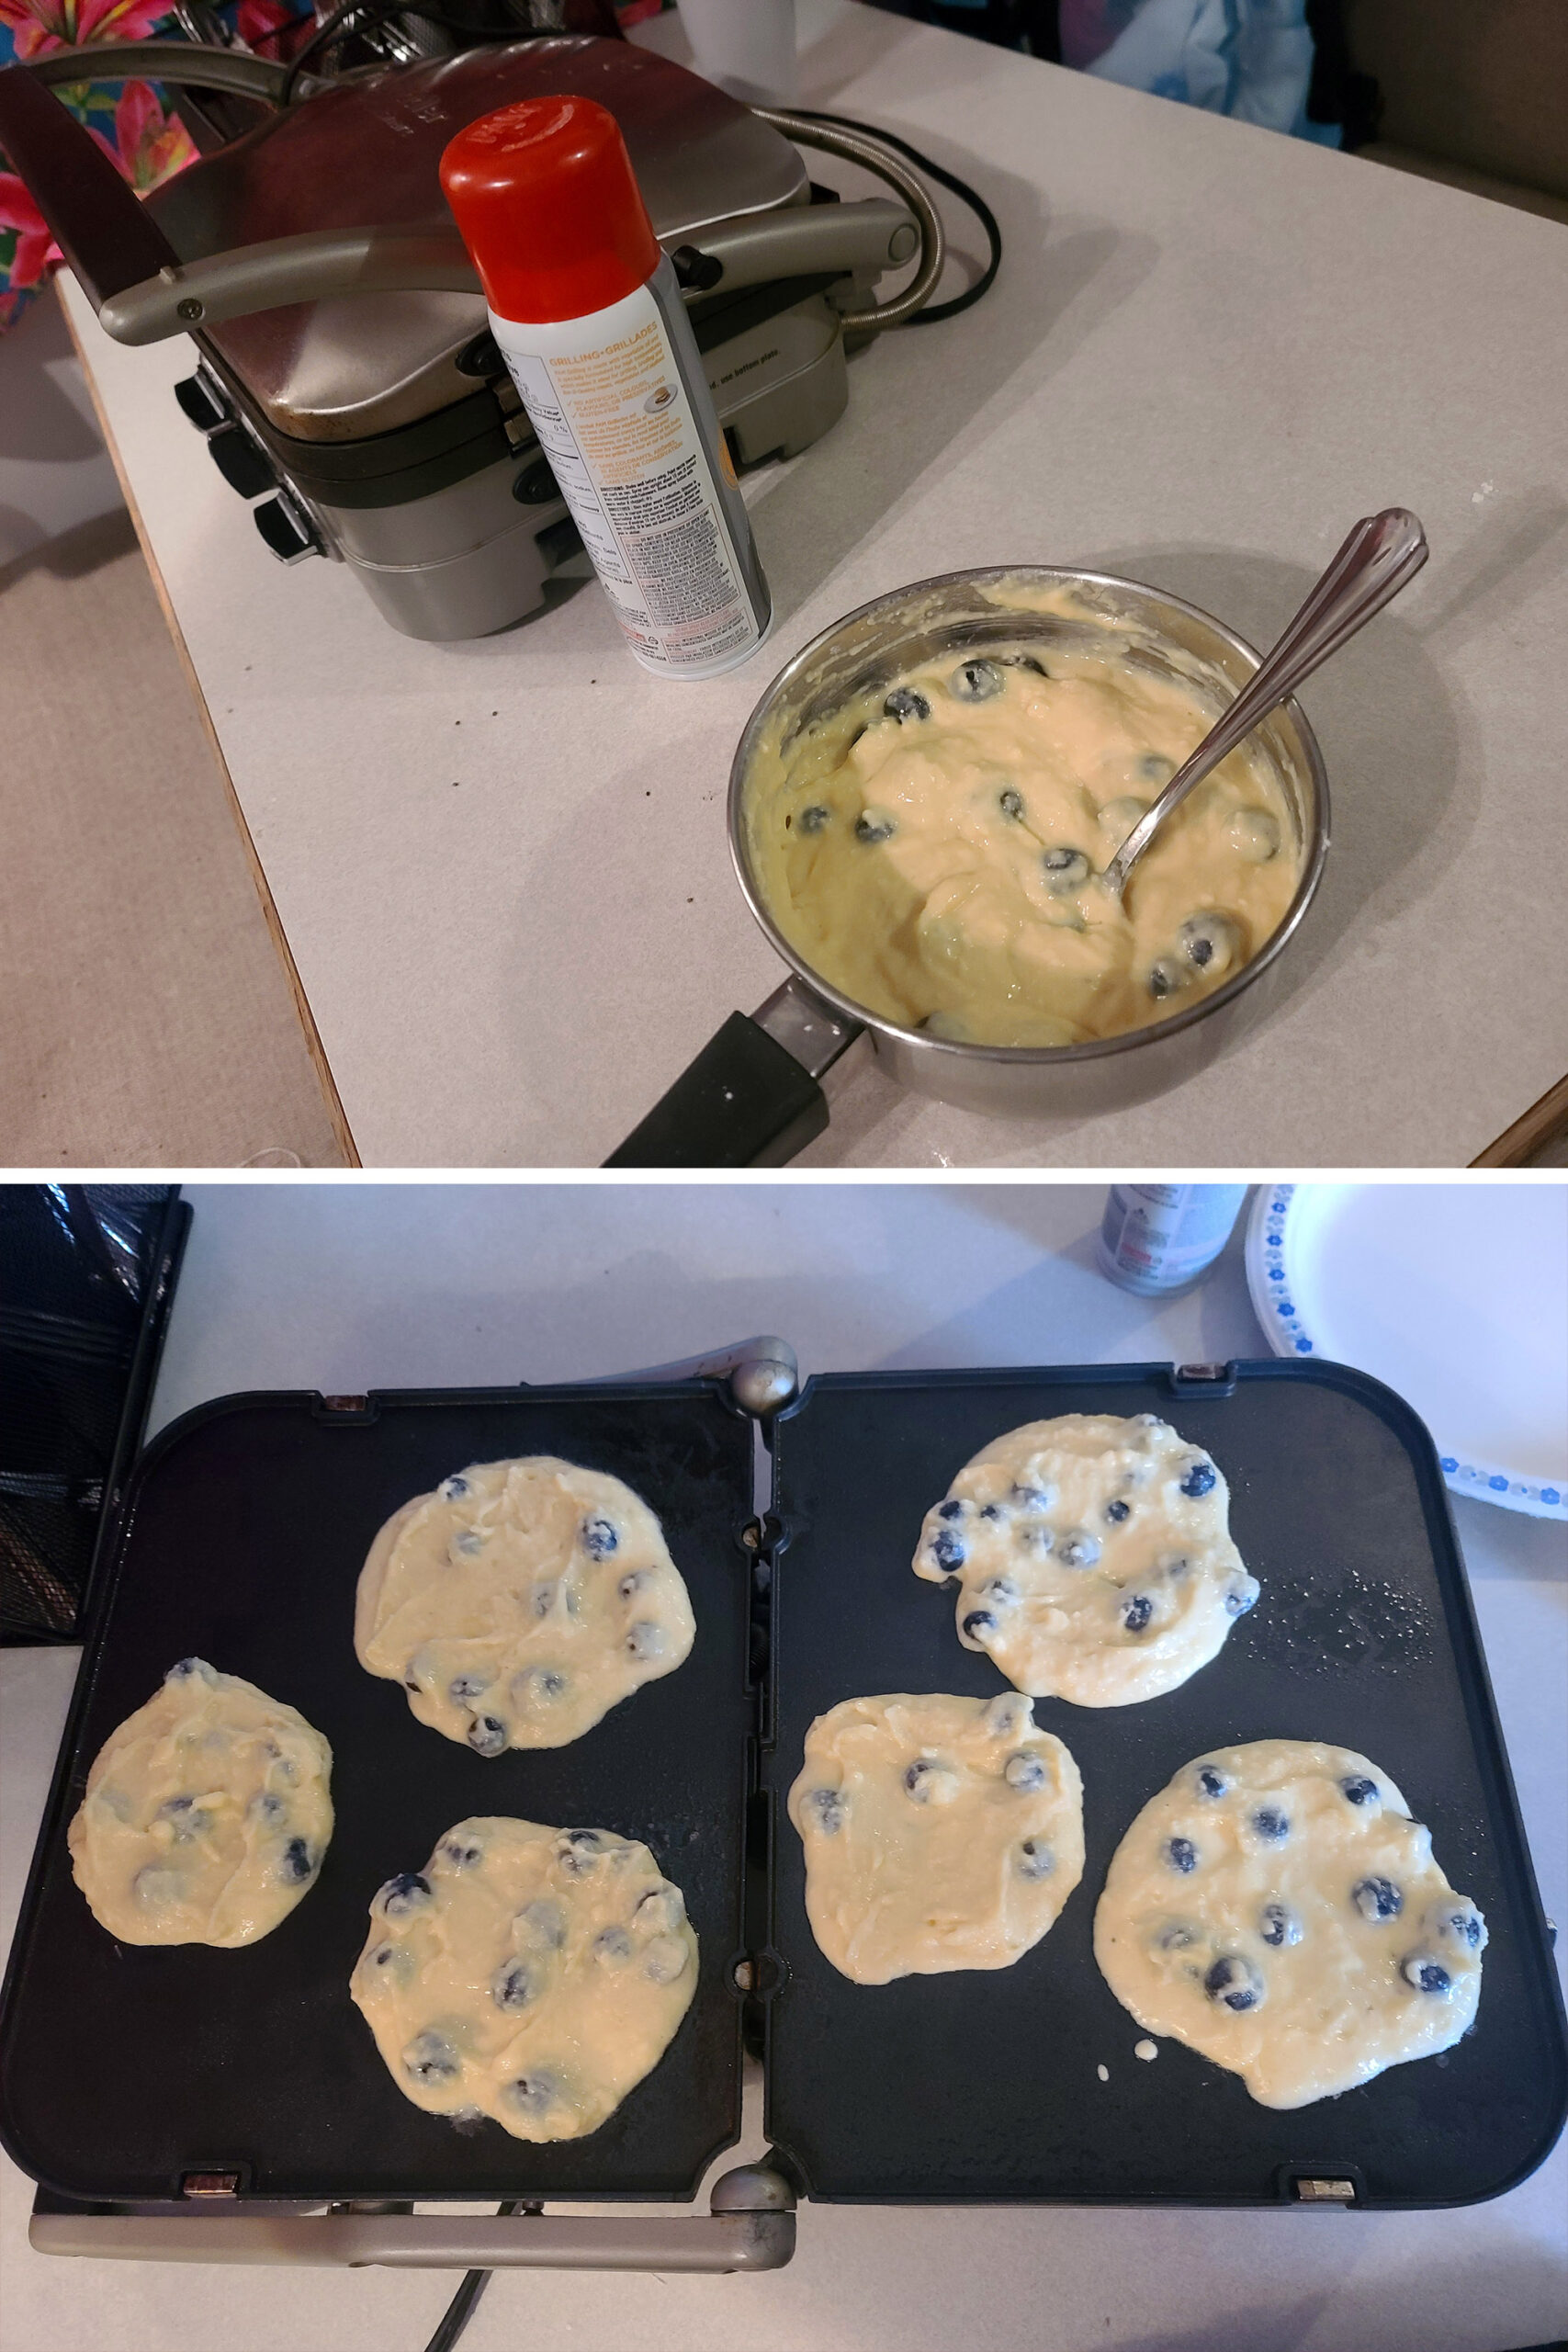 2 part image showing blueberry camp pancakes being mixed and cooked on a griddle.